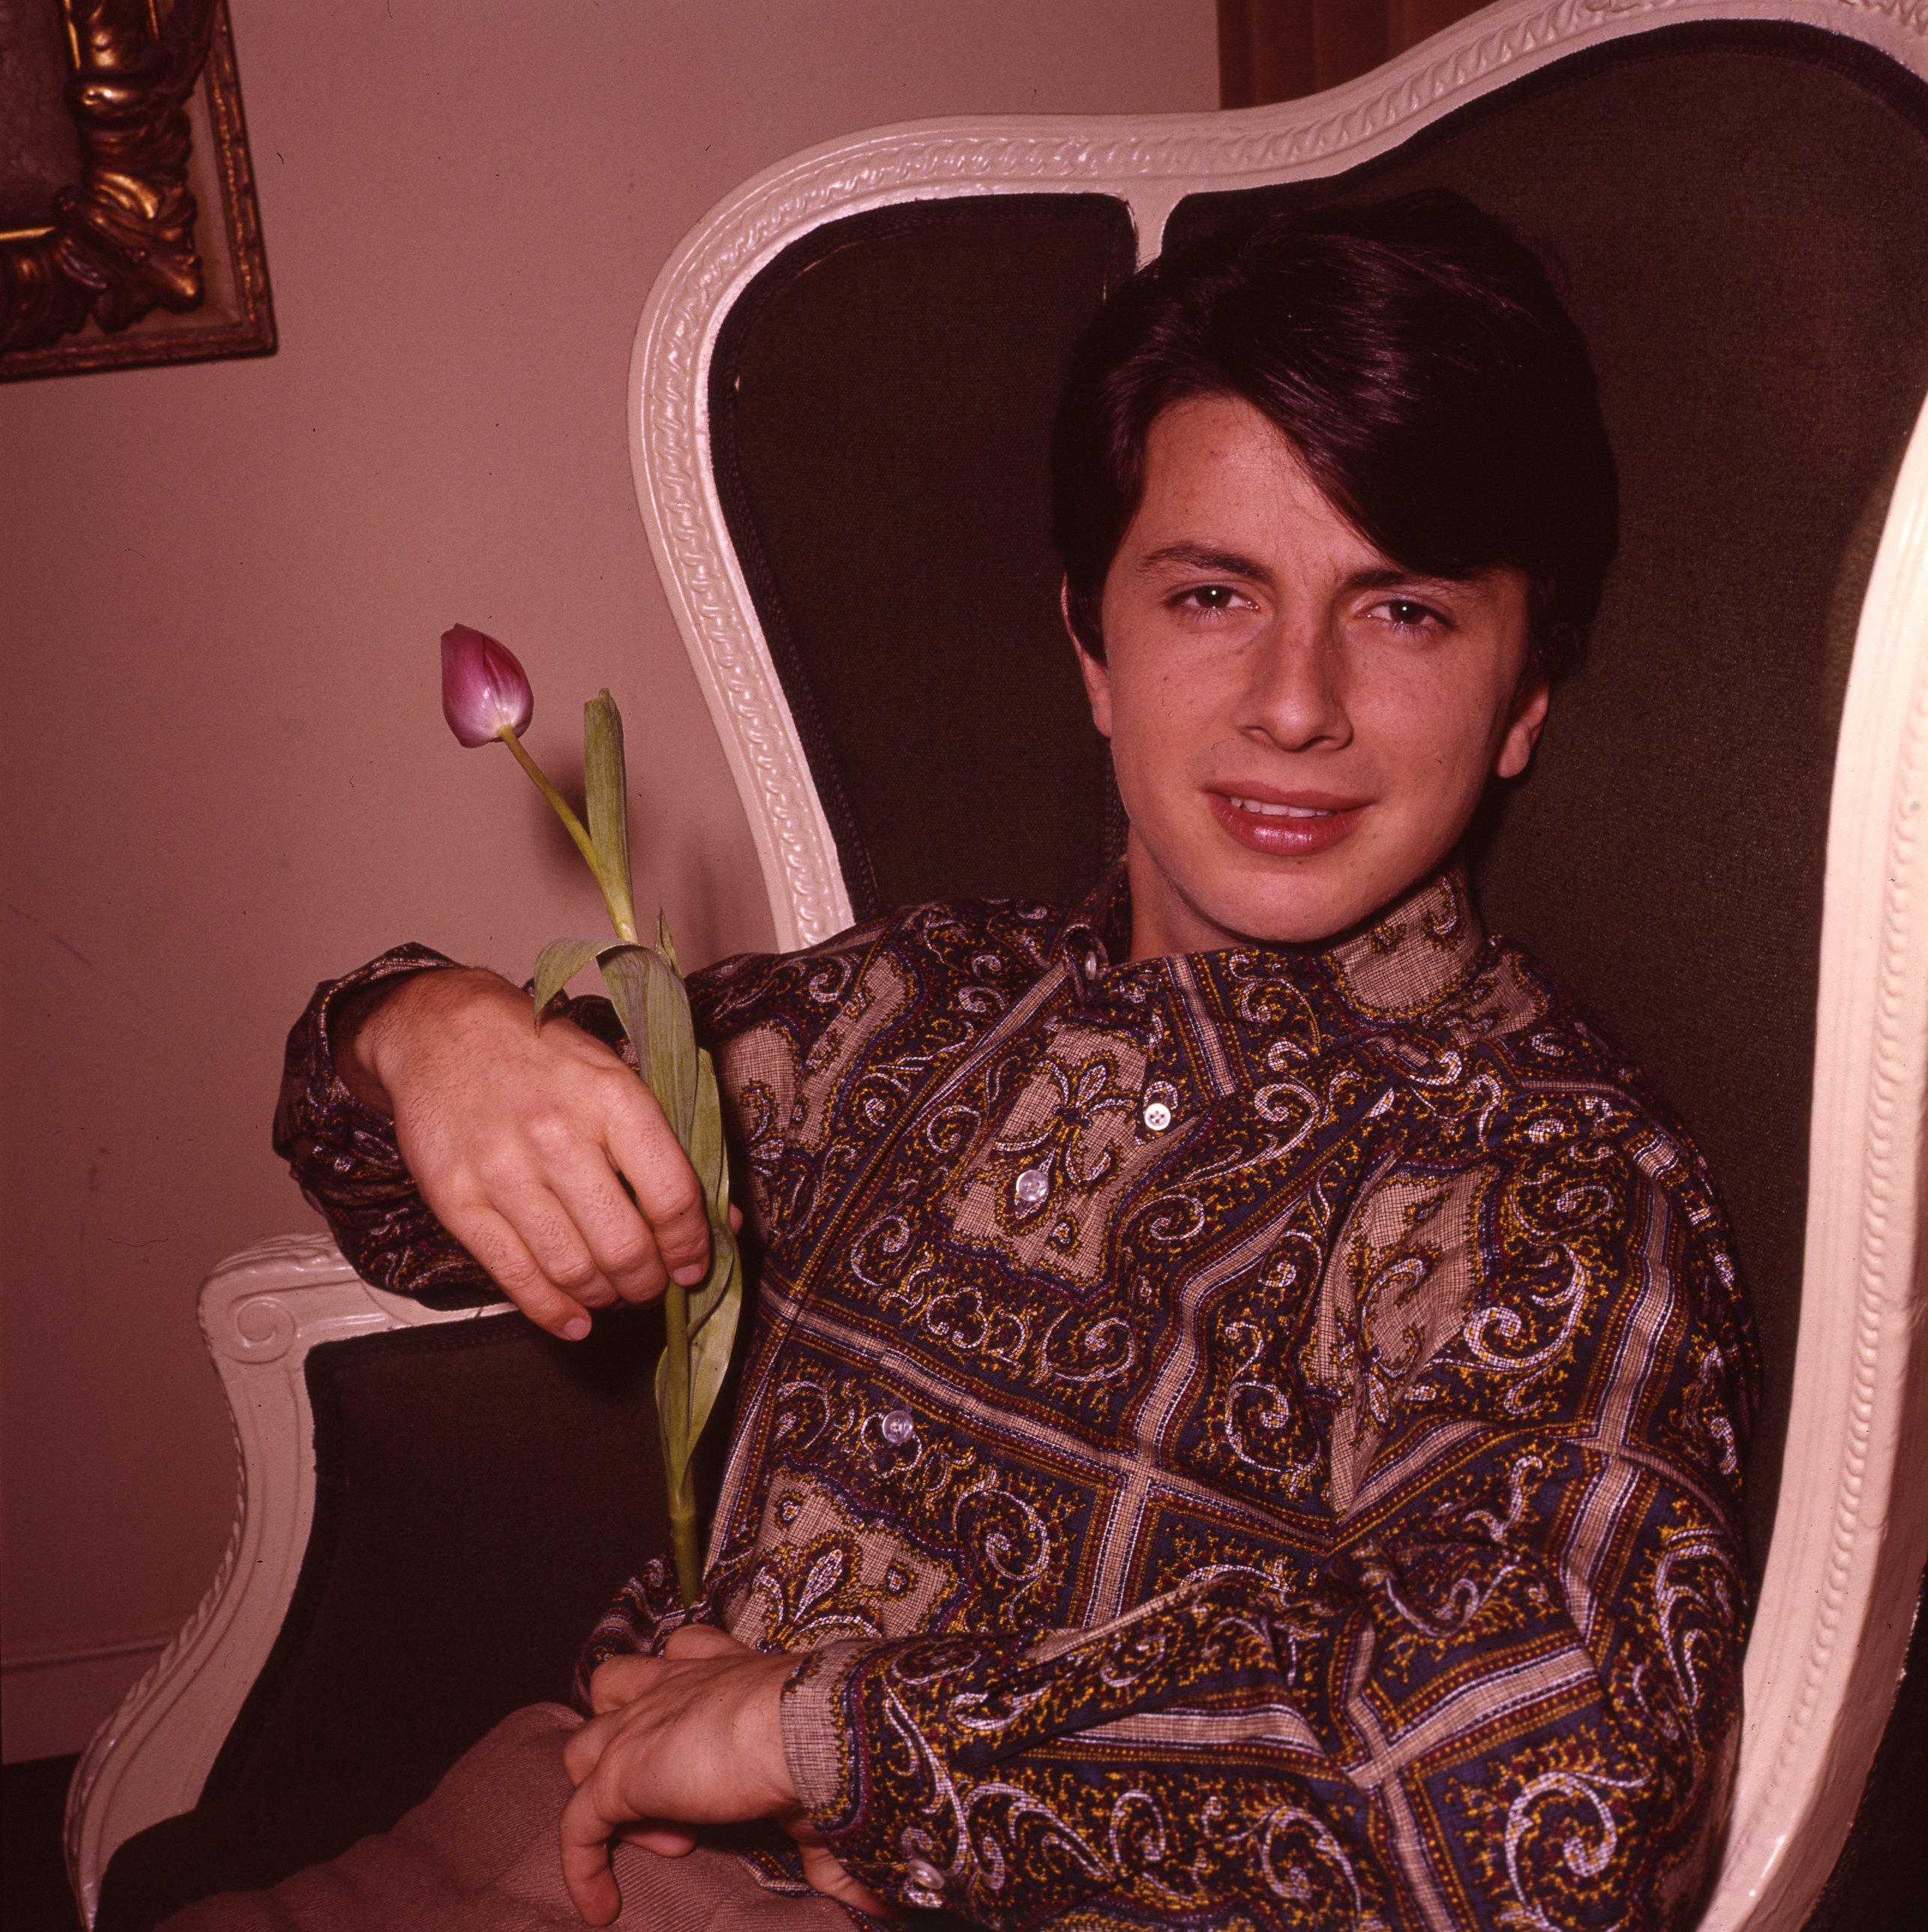 French pop singer Hervé Vilard, portrait with a tulip, Hamburg, Germany, approx.  1967. І Sources: Getty Images